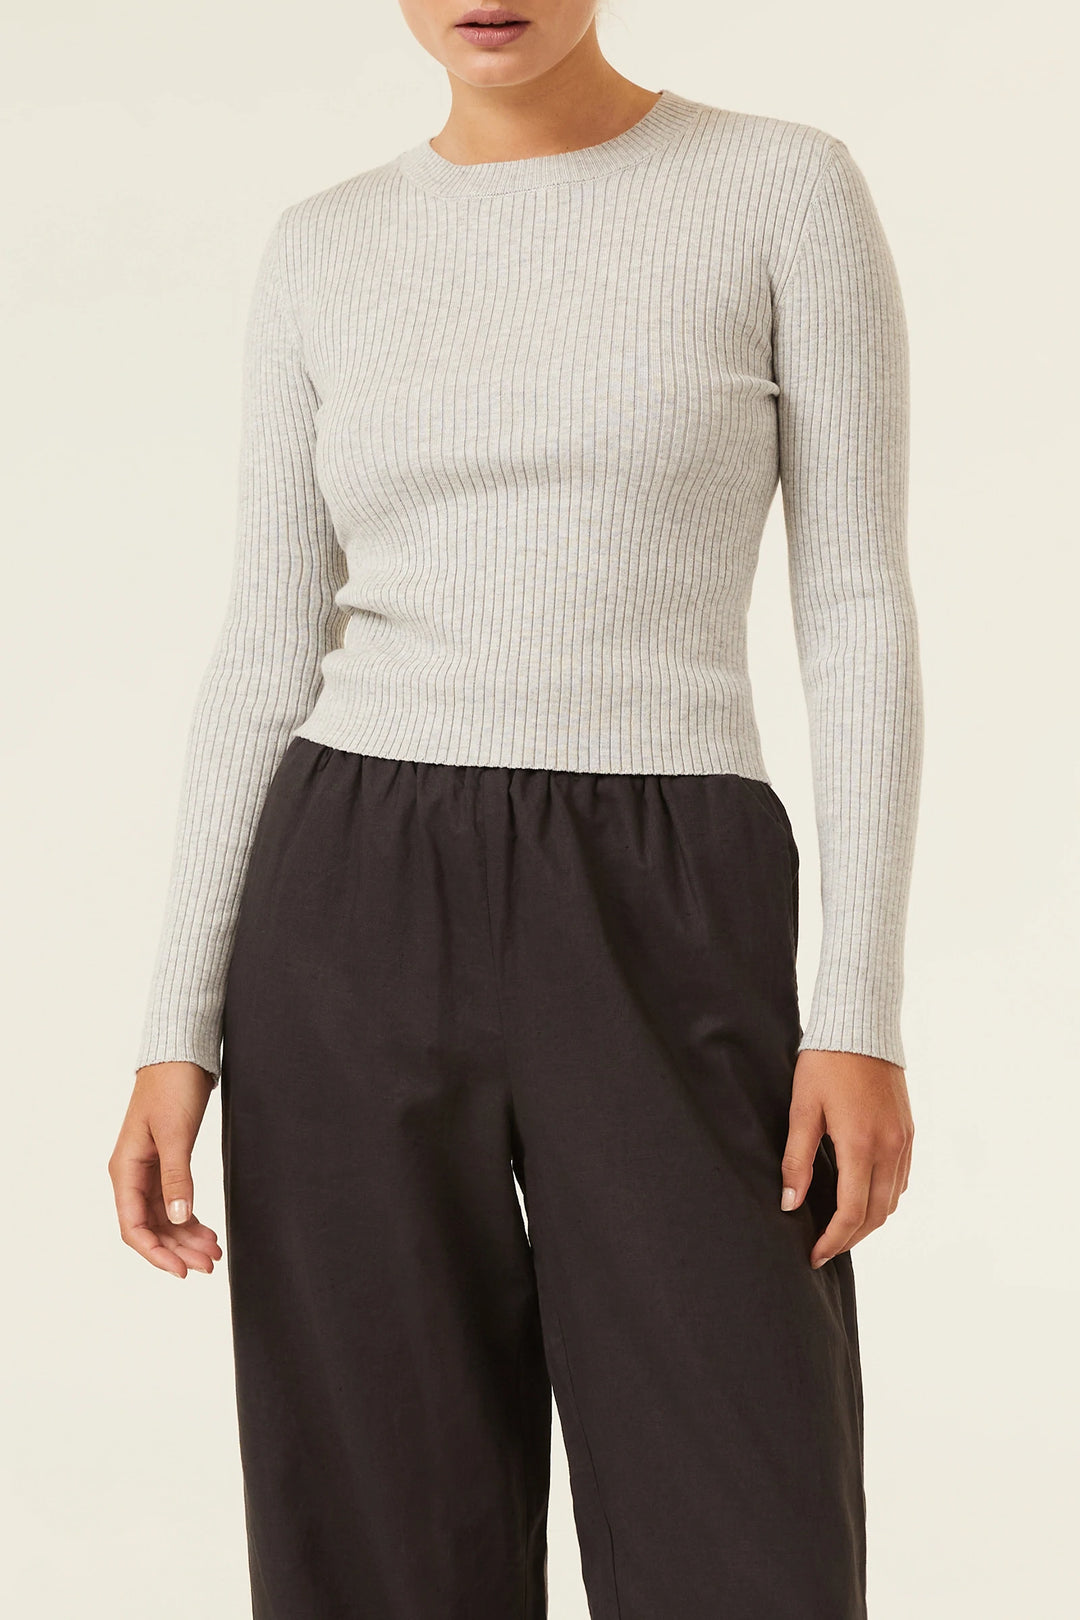 Nude Classic Knit - Grey Marle